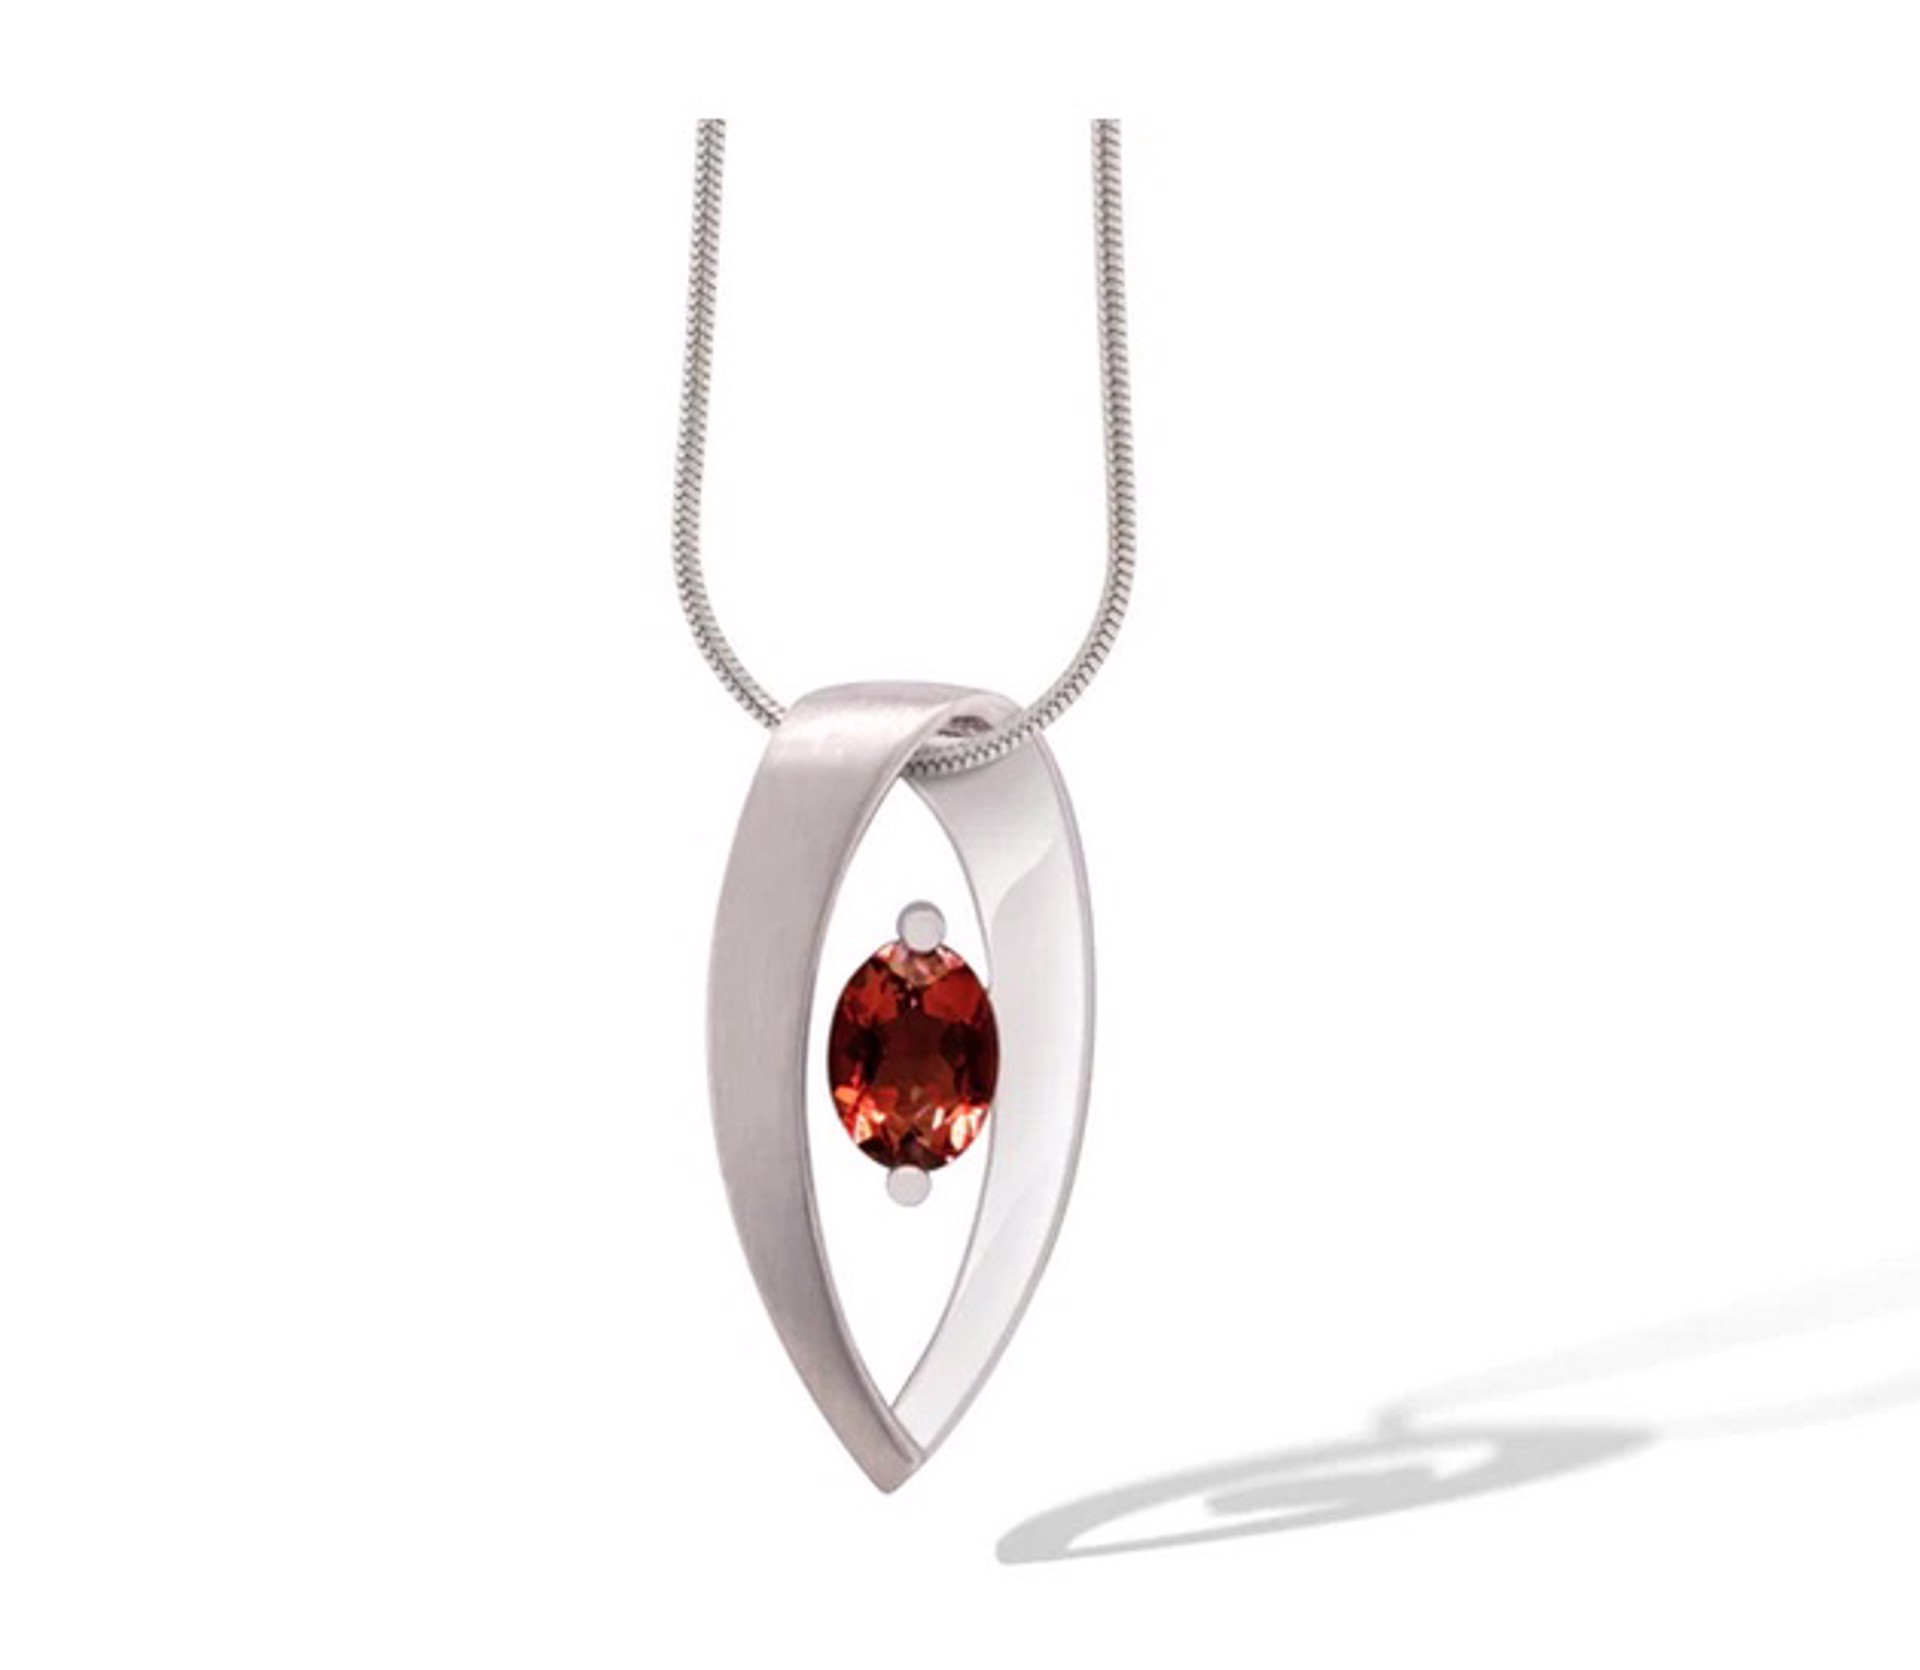 Pendant - Mozambique Garnet With Polished Sterling Silver Droplet P7320G by Joryel Vera